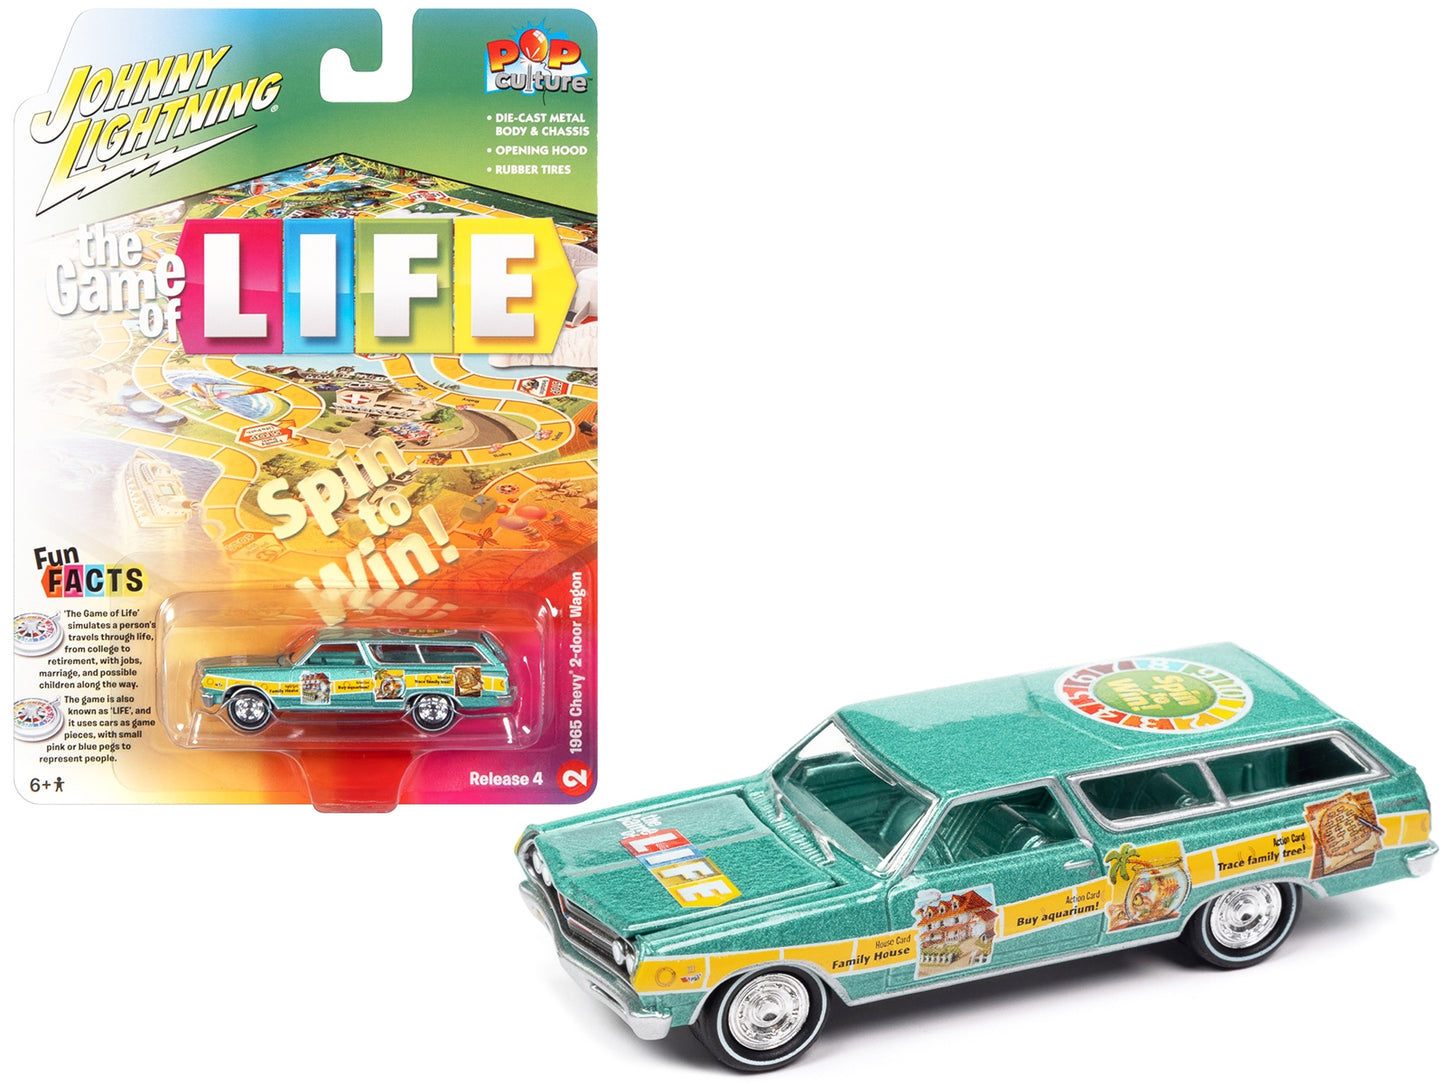 1965 Chevrolet 2-Door Station Wagon Turquoise Metallic "The Game of Life" "Pop Culture" 2022 Release 4 1/64 Diecast Model Car by Johnny Lightning